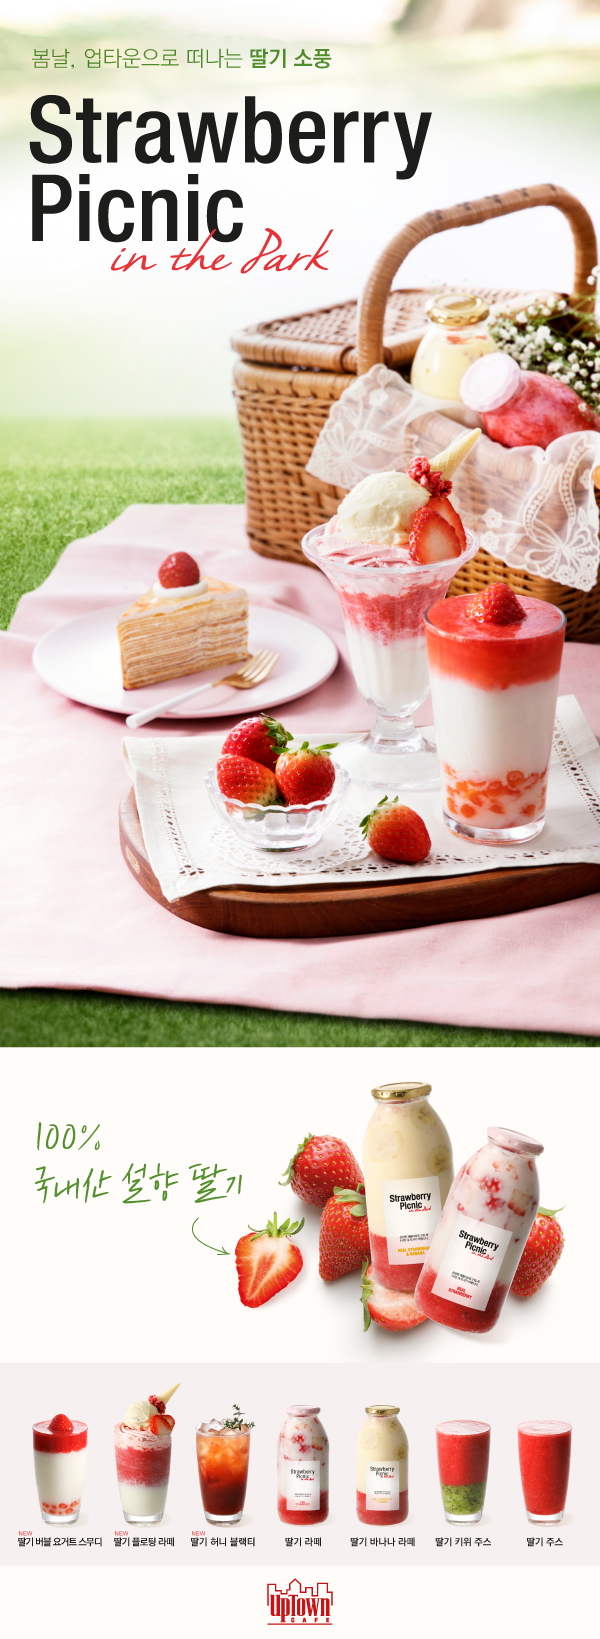 Strawberry Picnic in the Park